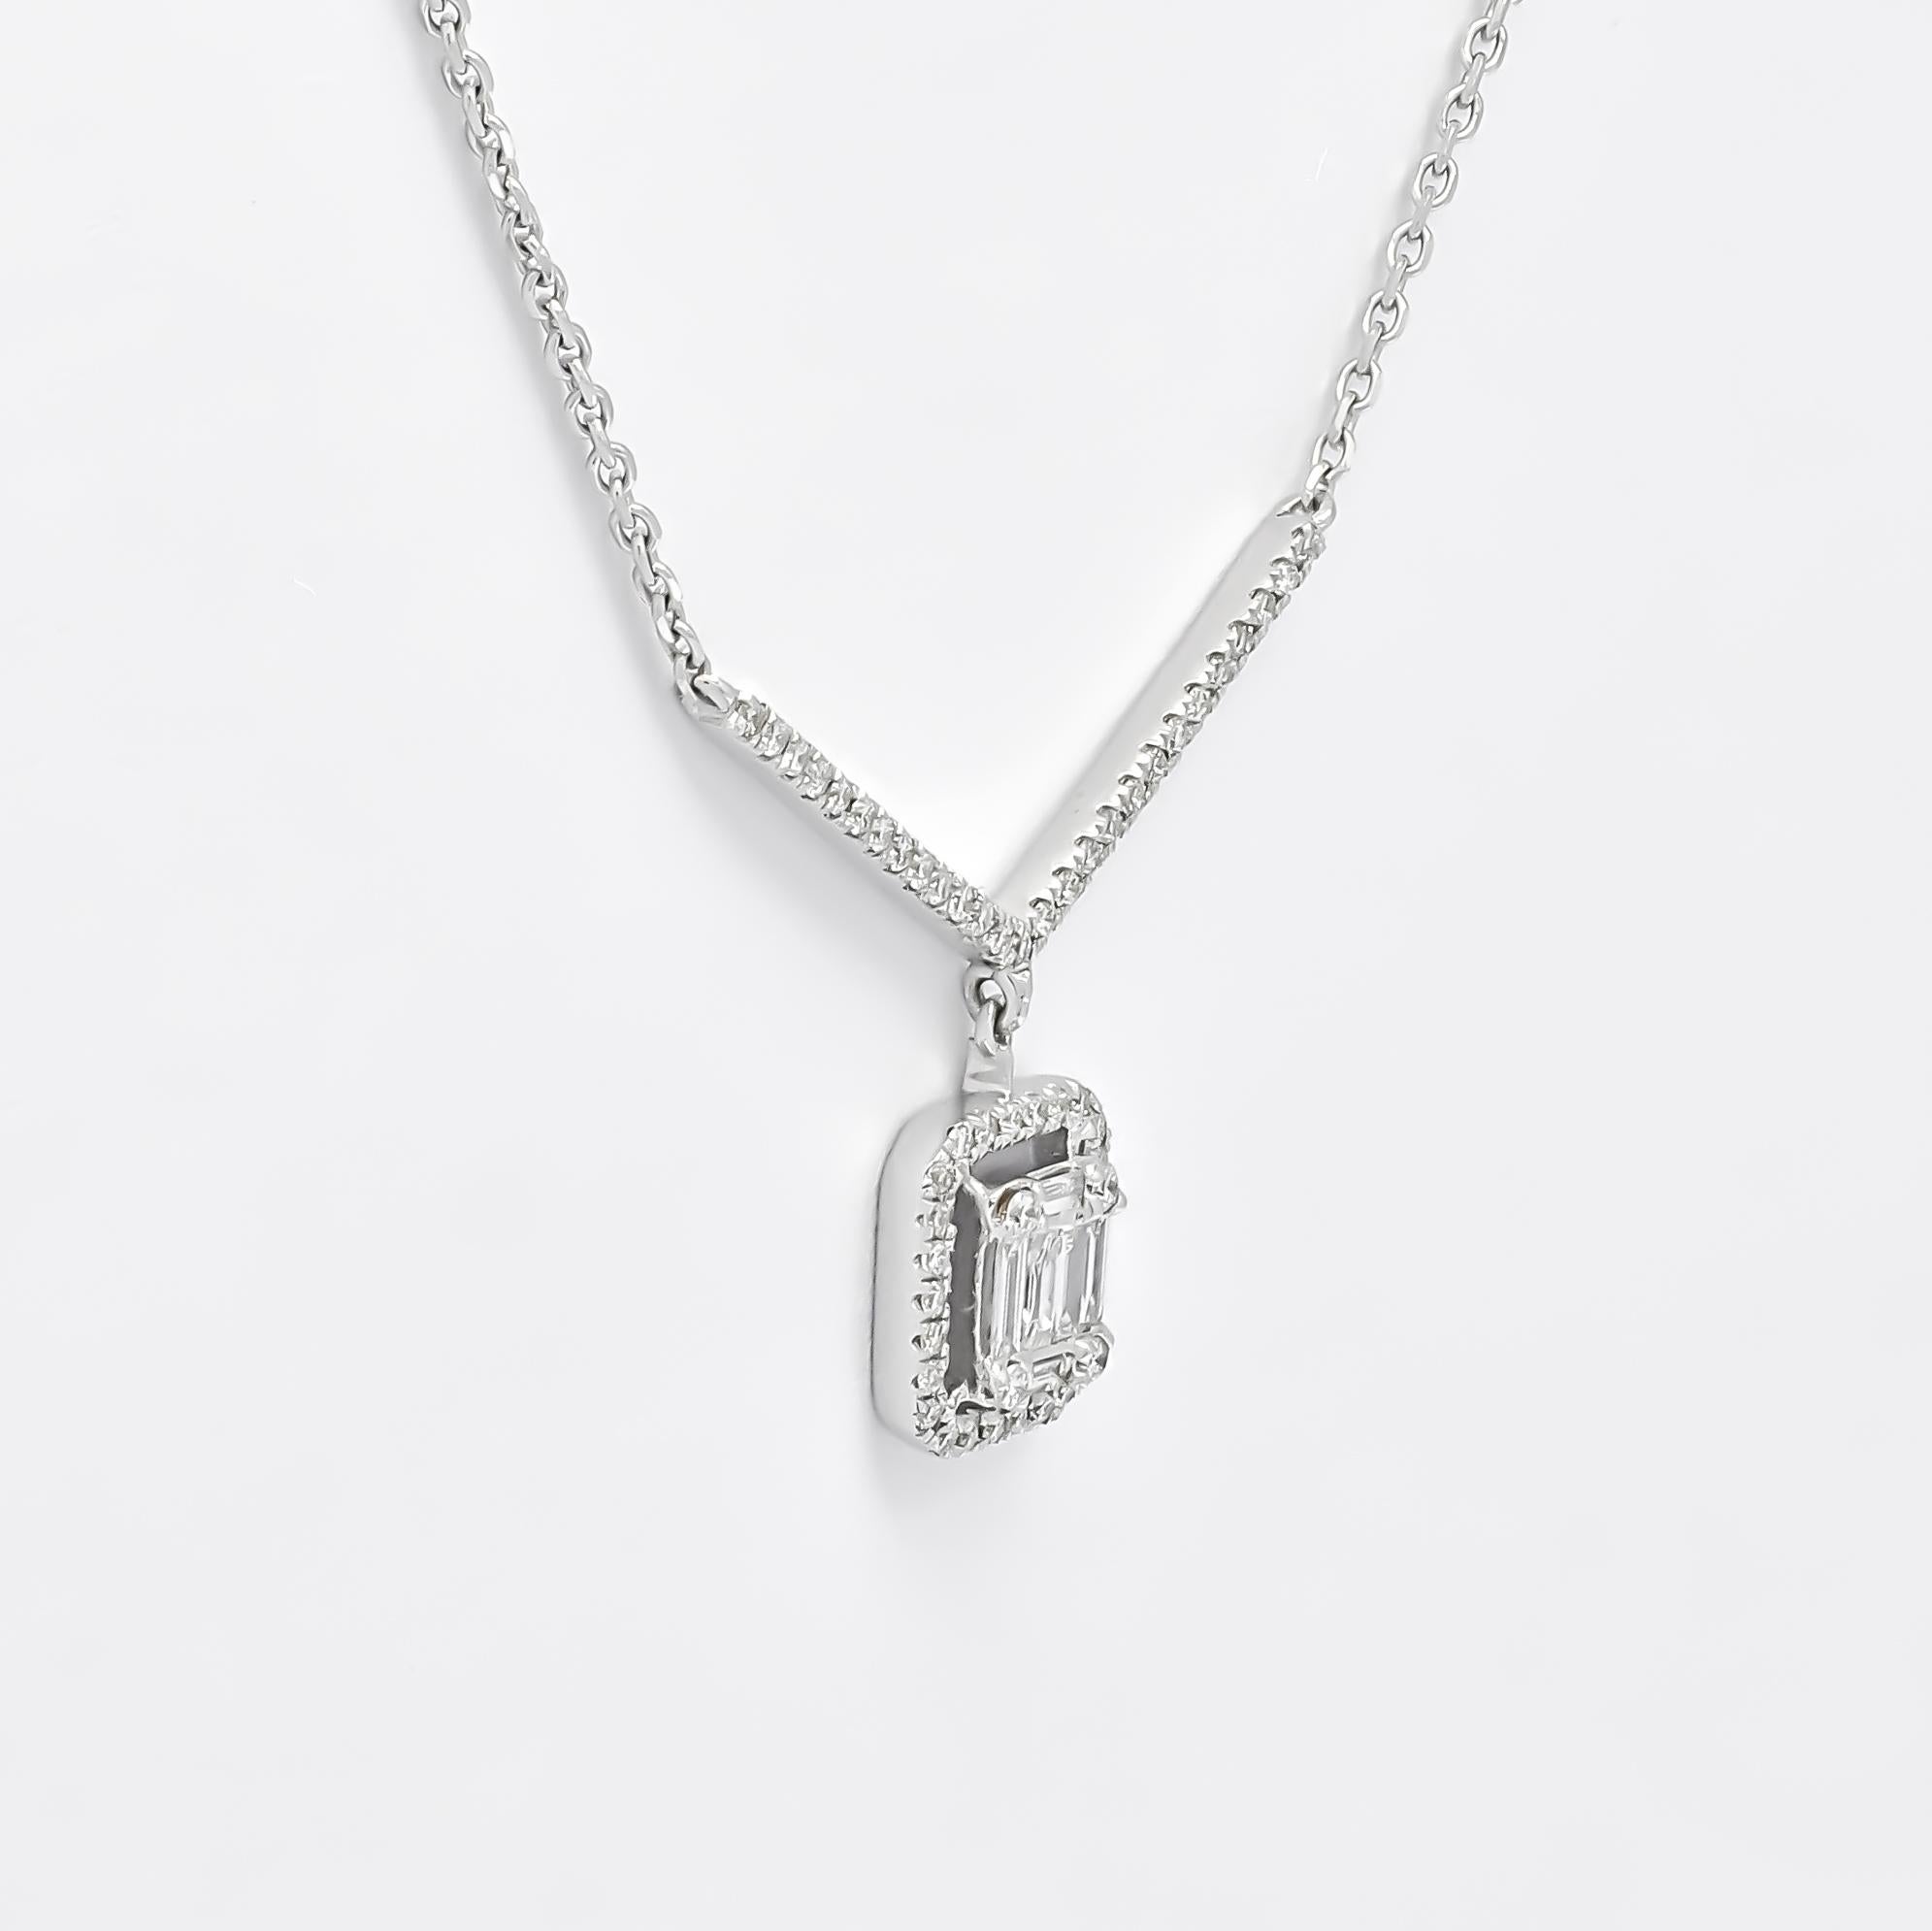 This 18KT White Gold Natural Diamonds Cluster Art Deco Pendant in a single row diamond chain  epitomizes sophistication and charm. Adorned with a total of 0.31 carats of sparkling diamonds, it stands as a radiant symbol of elegance.

Crafted with